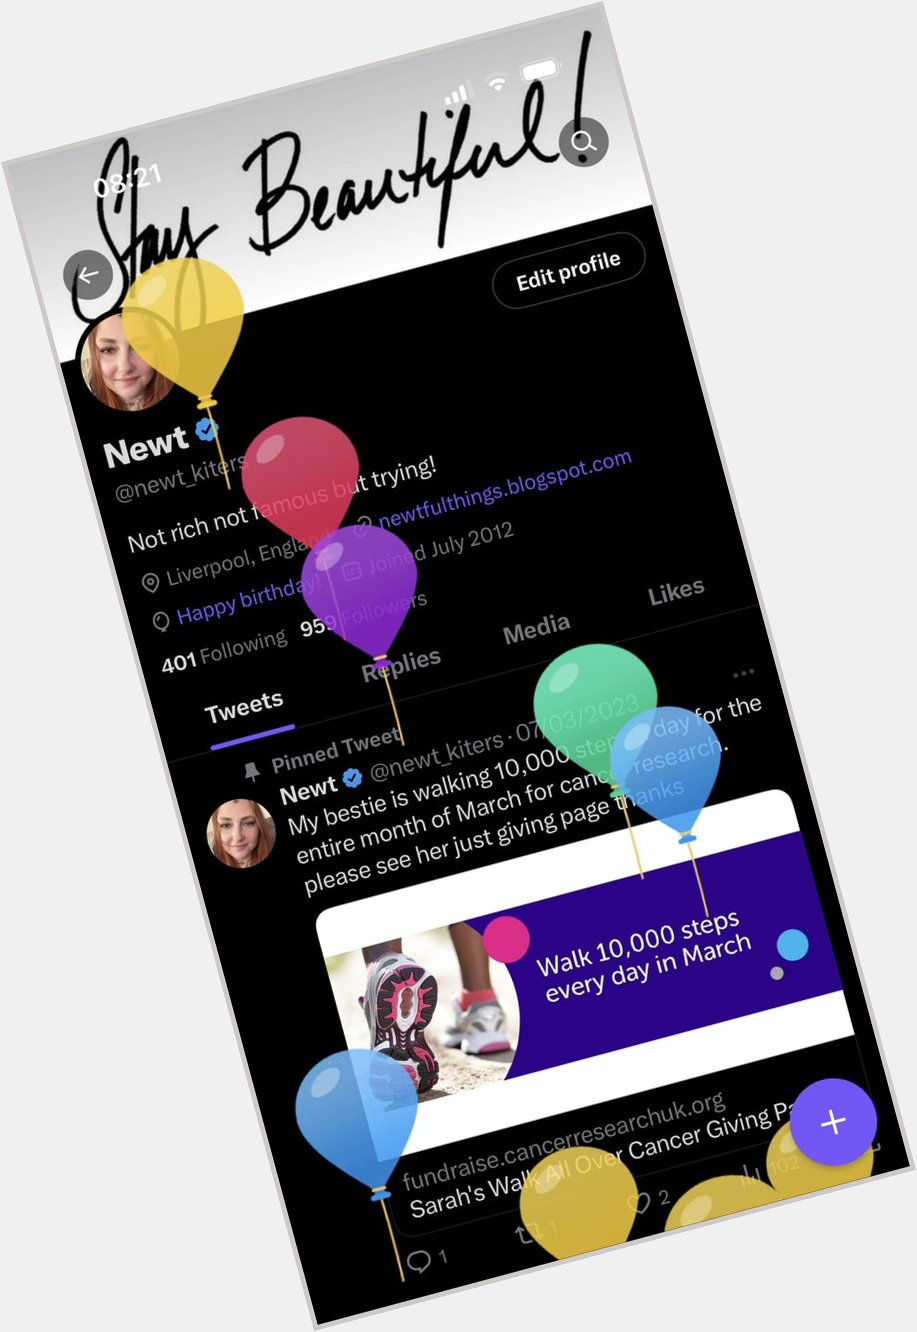 Happy birthday to me! I love the balloons and I share my birthday with Jerome Flynn    